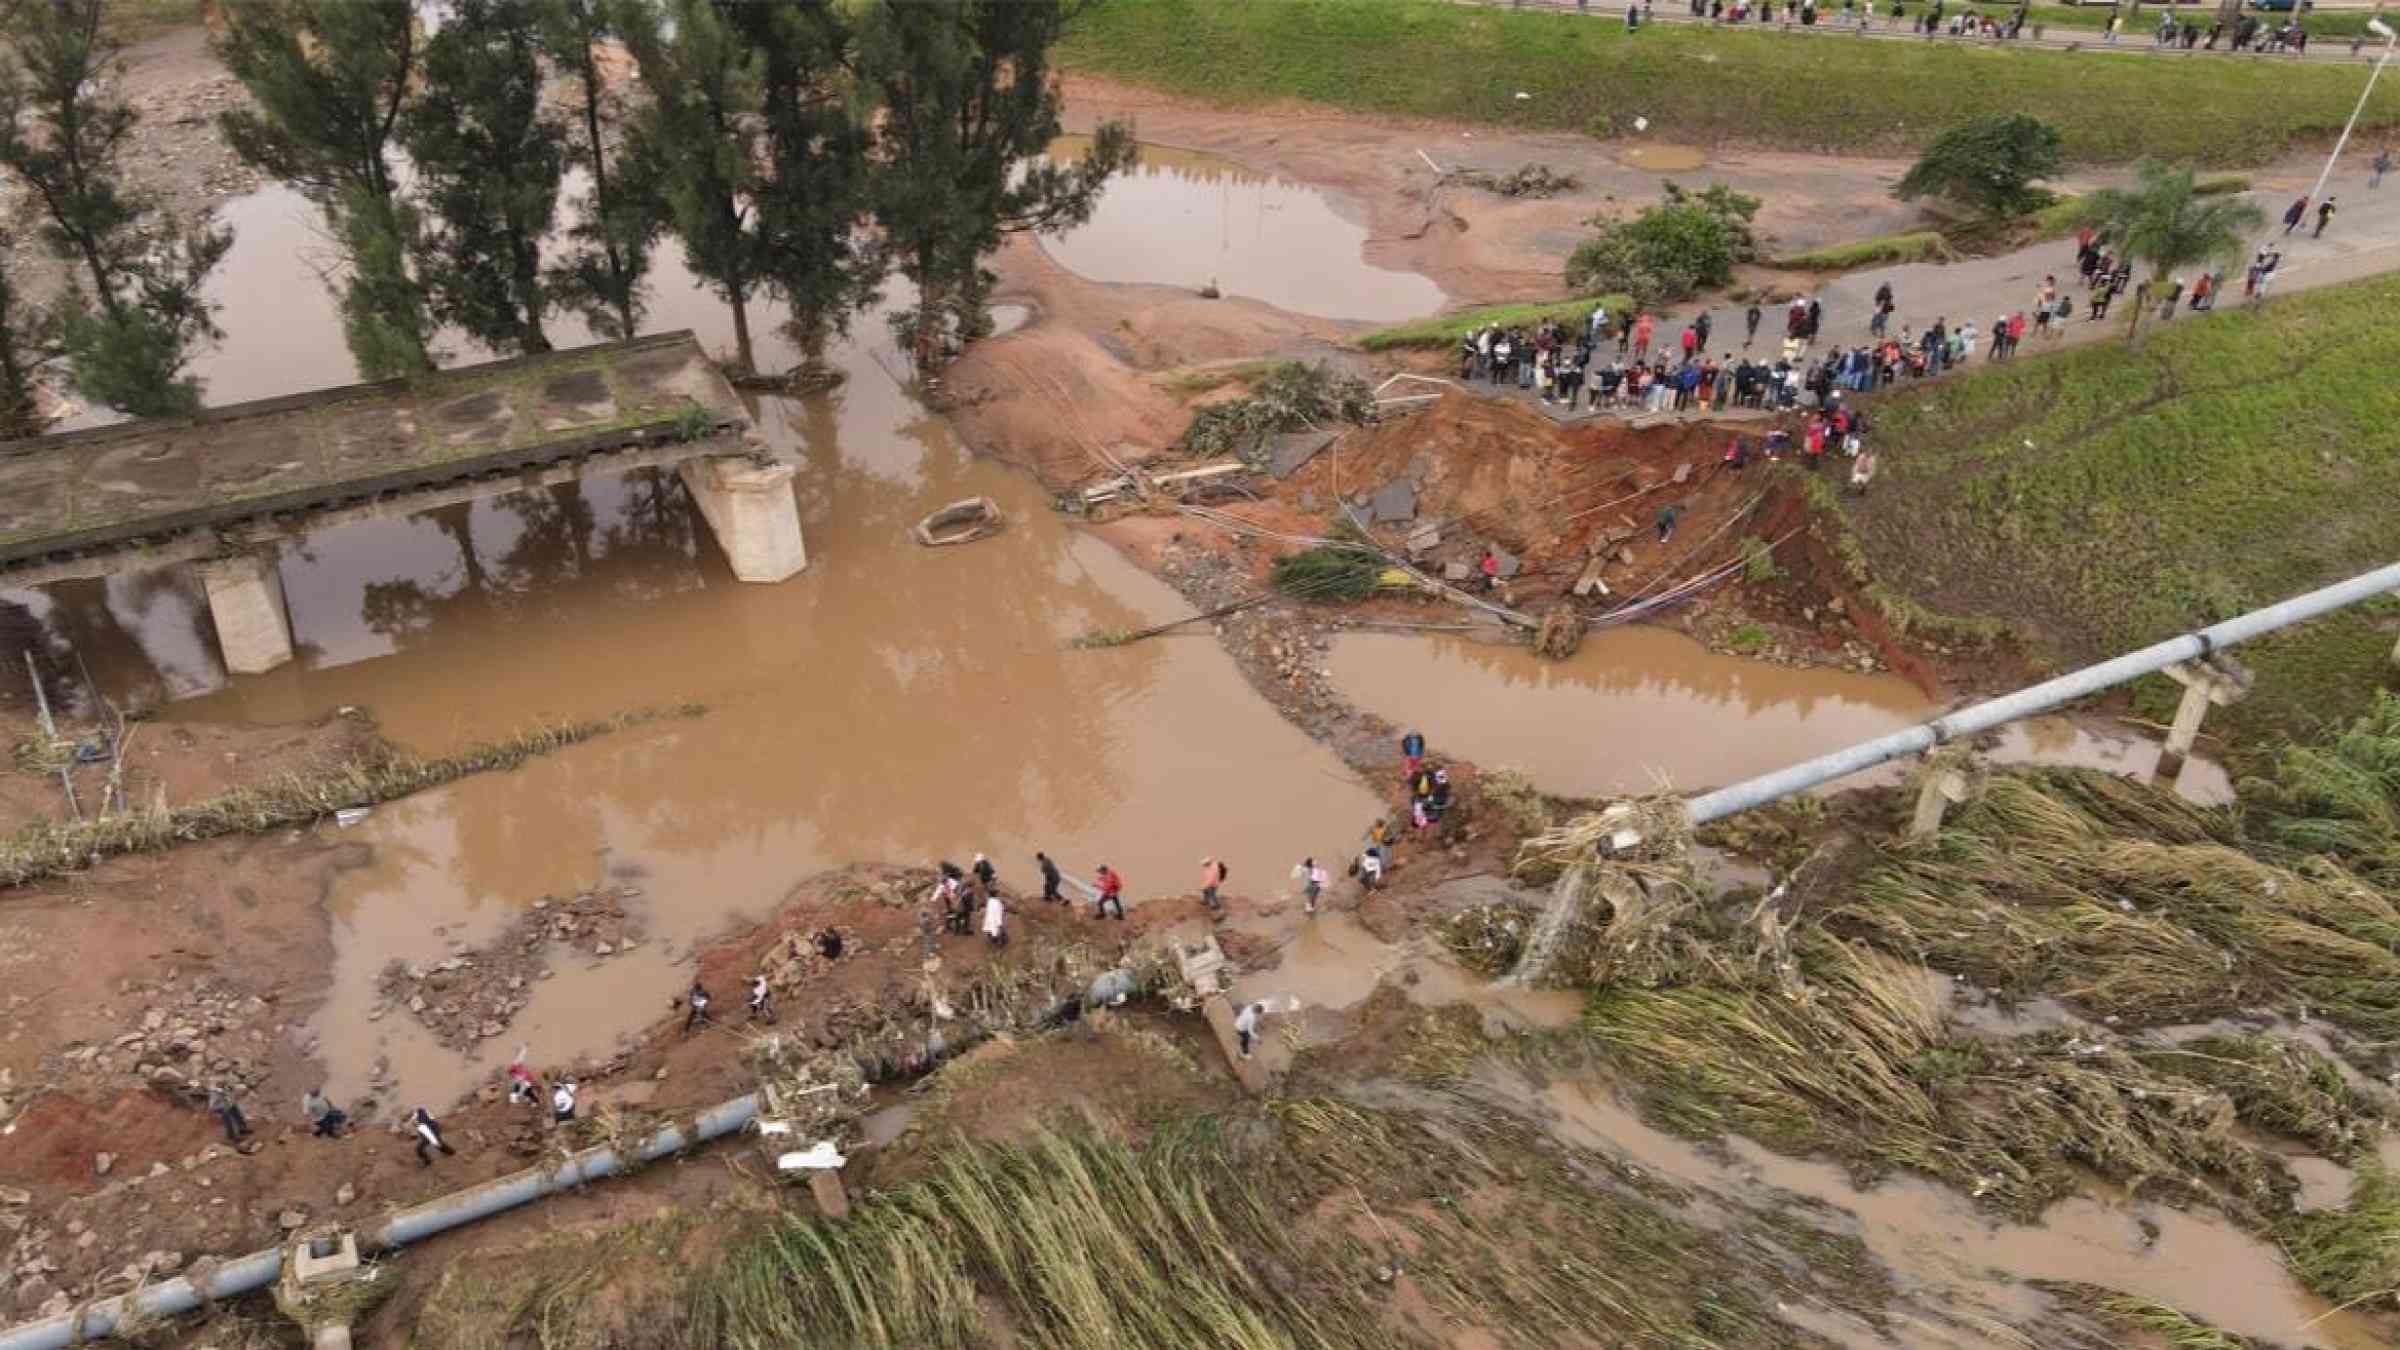 Workers return to a damaged road after floods in Durban